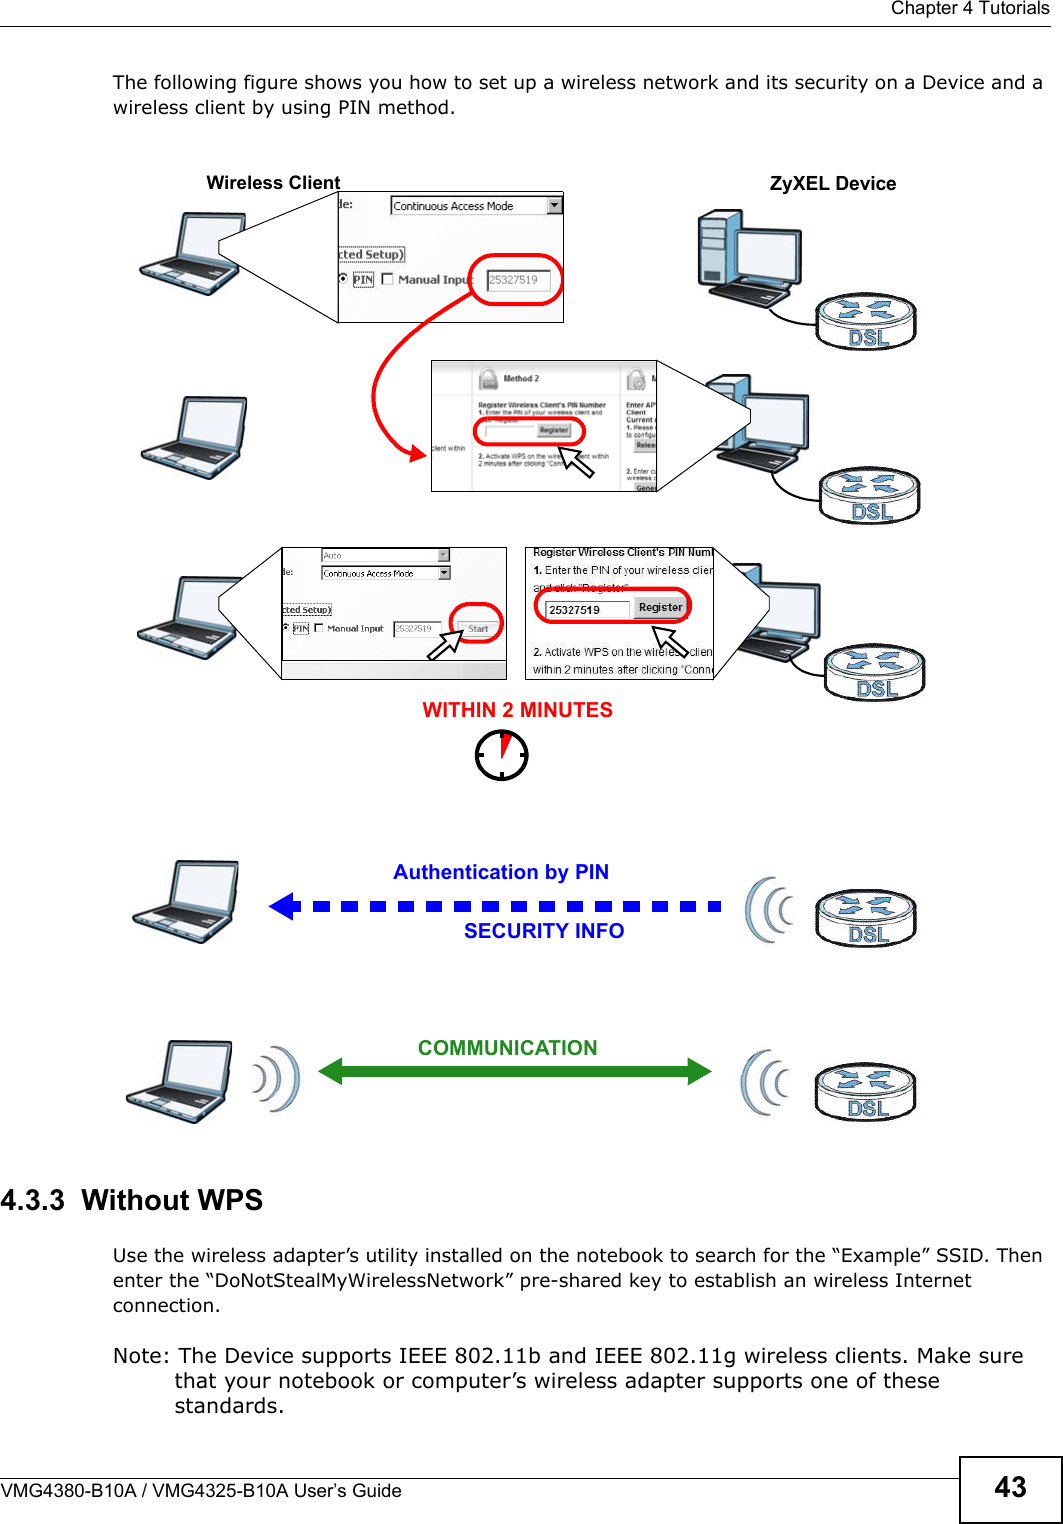  Chapter 4 TutorialsVMG4380-B10A / VMG4325-B10A User’s Guide 43The following figure shows you how to set up a wireless network and its security on a Device and a wireless client by using PIN method. Example WPS Process: PIN  Method4.3.3  Without WPSUse the wireless adapter’s utility installed on the notebook to search for the “Example” SSID. Thenenter the “DoNotStealMyWirelessNetwork” pre-shared key to establish an wireless Internet connection.Note: The Device supports IEEE 802.11b and IEEE 802.11g wireless clients. Make sure that your notebook or computer’s wireless adapter supports one of these standards.Authentication by PINSECURITY INFOWITHIN 2 MINUTESWireless ClientZyXEL DeviceCOMMUNICATION